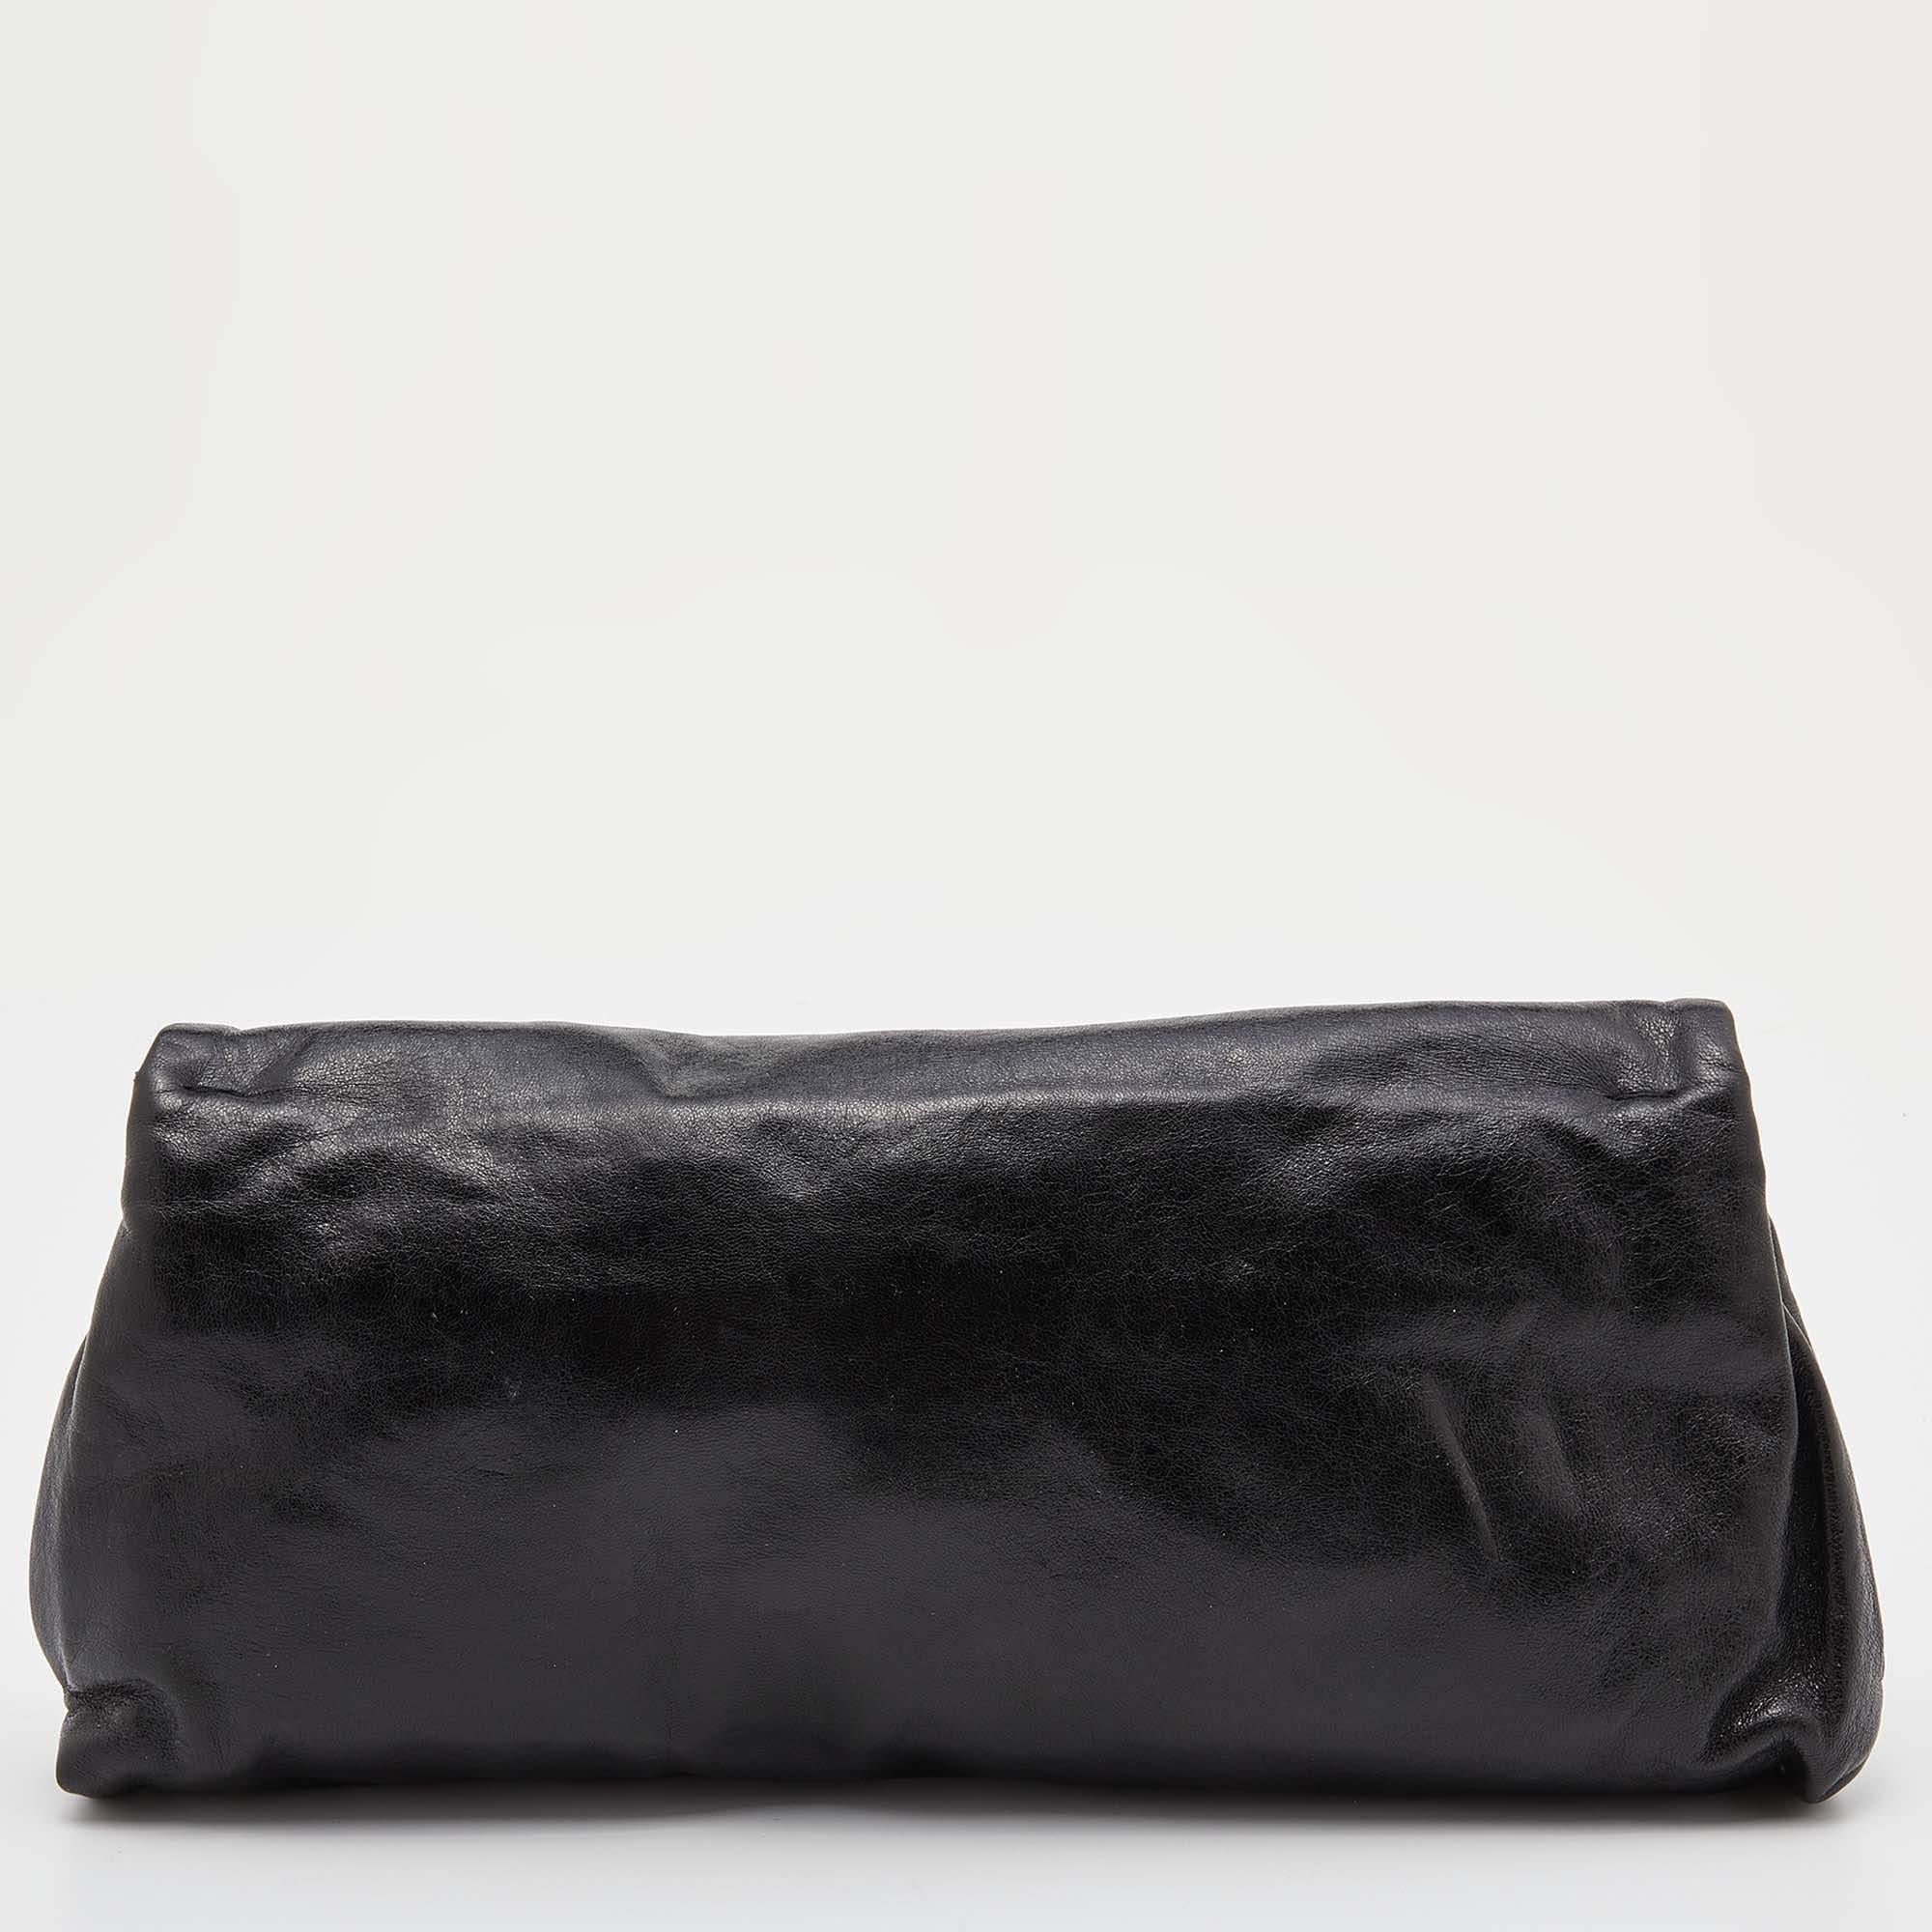 Always pushing the boundaries of creativity and burring the lines between fashion and edge, Alexander McQueen is a brand we cannot help but love. This clutch from the brand is a fun take on a staple accessory. It is crafted from leather and it is